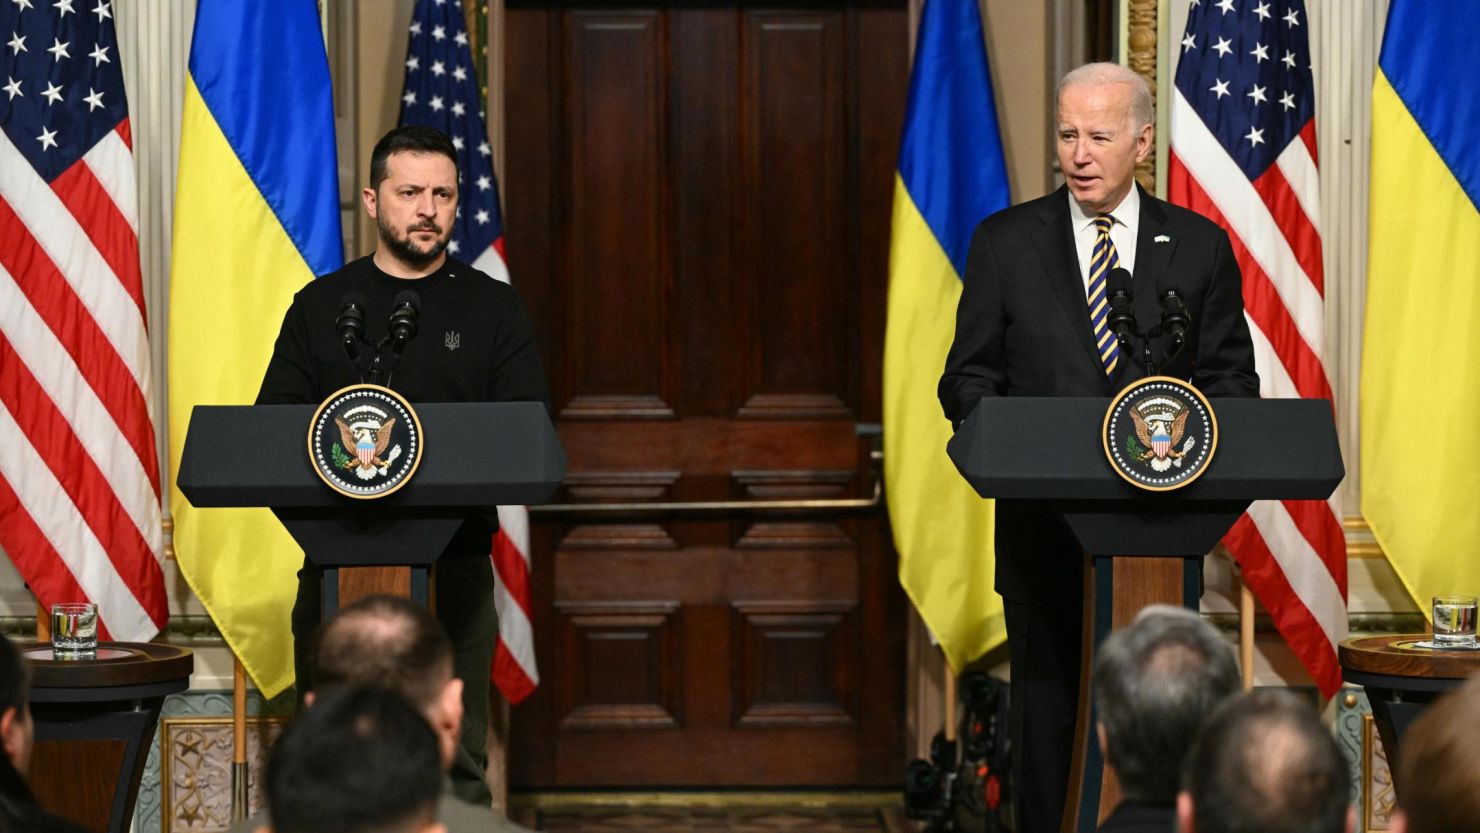 Ukraine and The United States talk for support